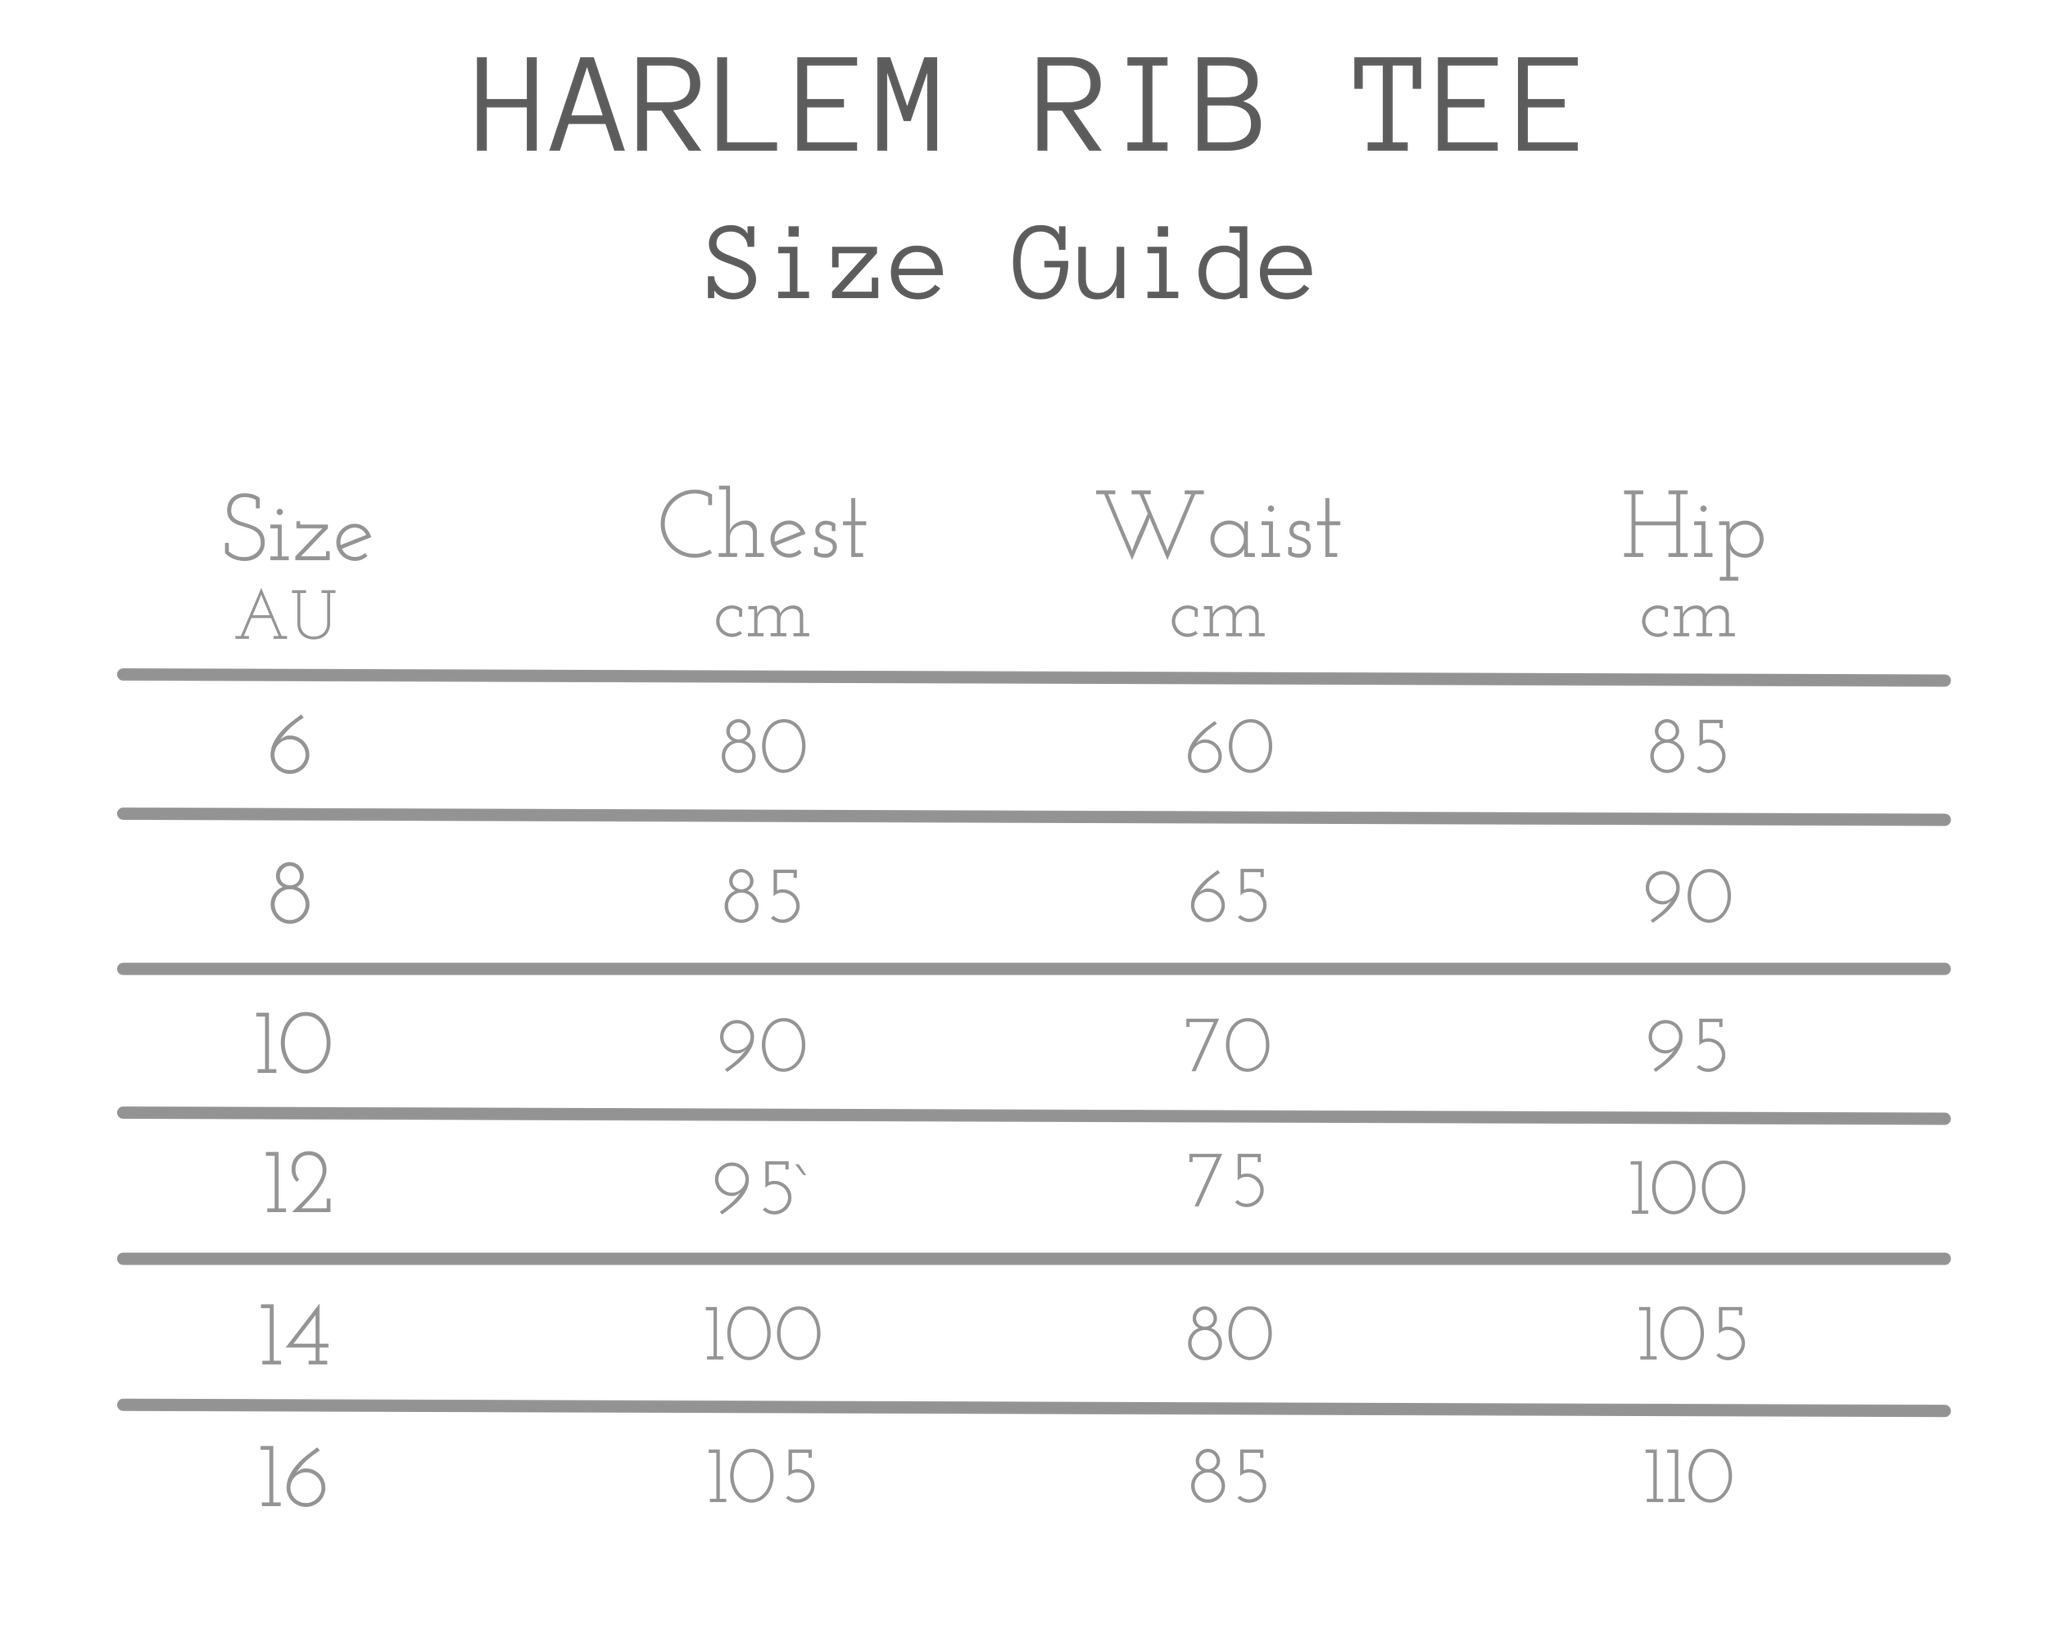 Silent Theory Harlem Rib Tee Size Guide